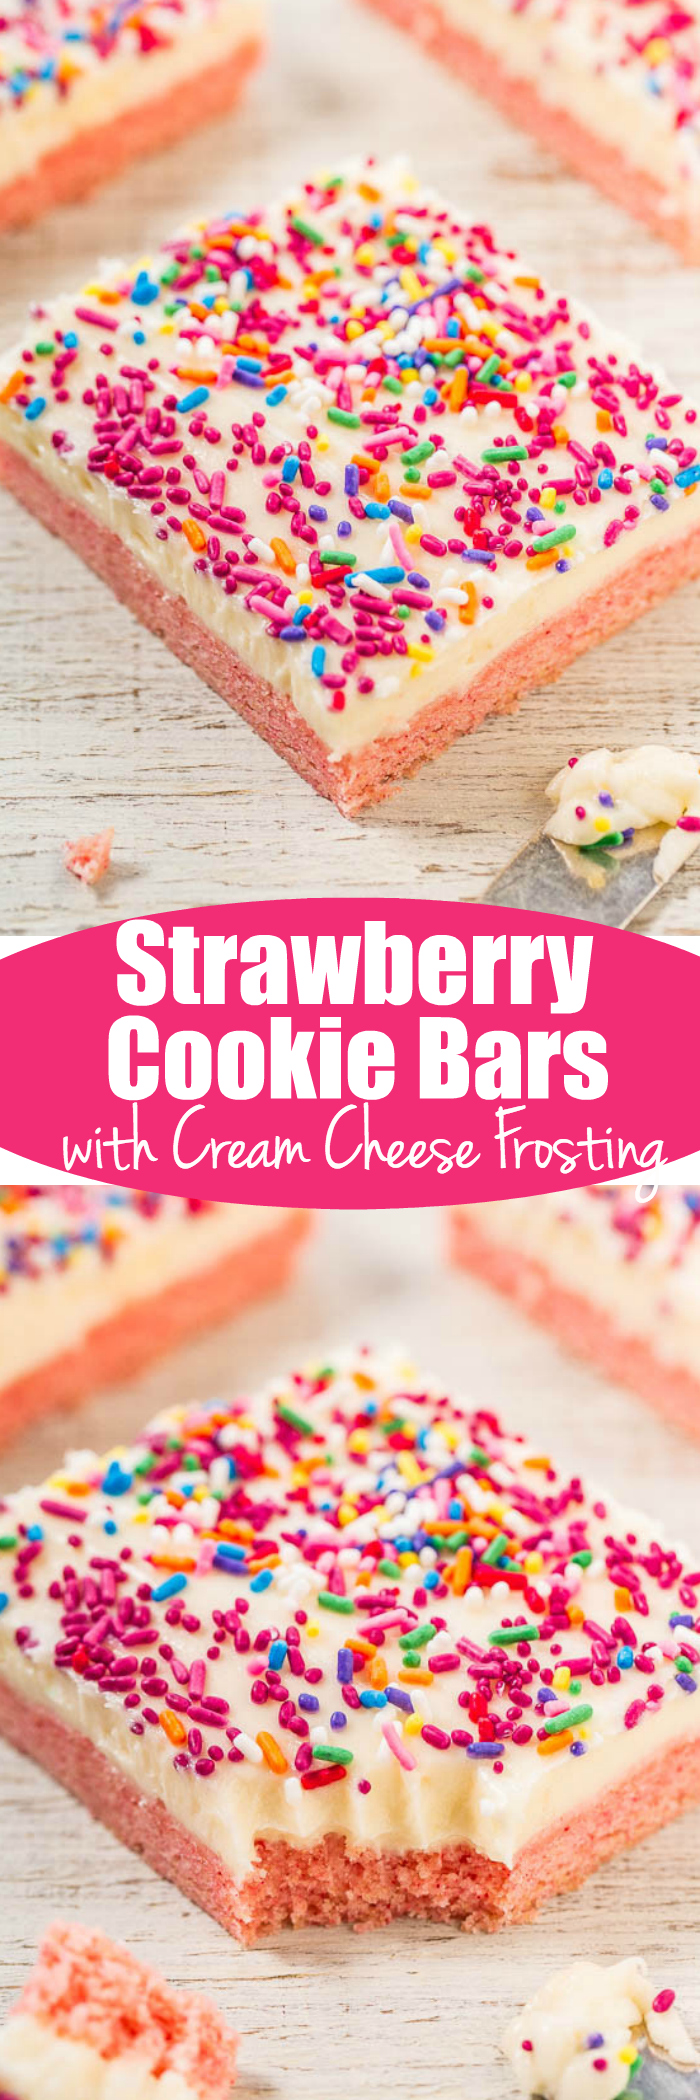 Strawberry Cookie Bars with Vanilla Cream Cheese Frosting - Soft, chewy, and bursting with strawberry flavor!! The frosting and sprinkles make these easy, goof-proof bars taste even better! Perfect for parties and holidays!!